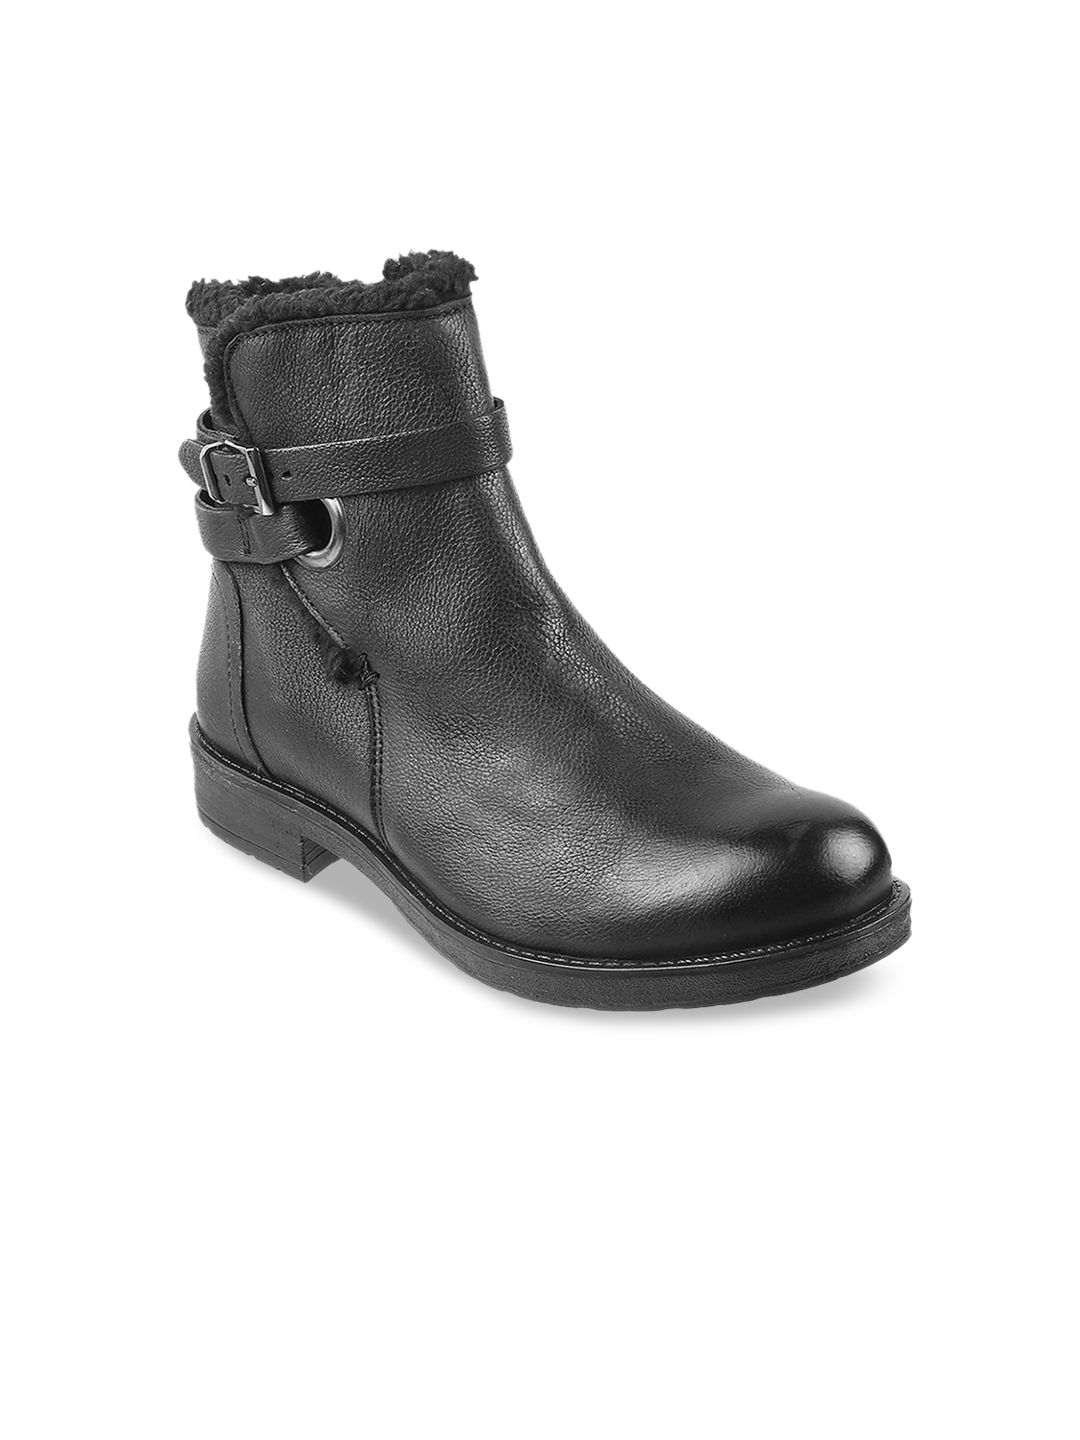 Mochi Women Black Flat Boots Price in India